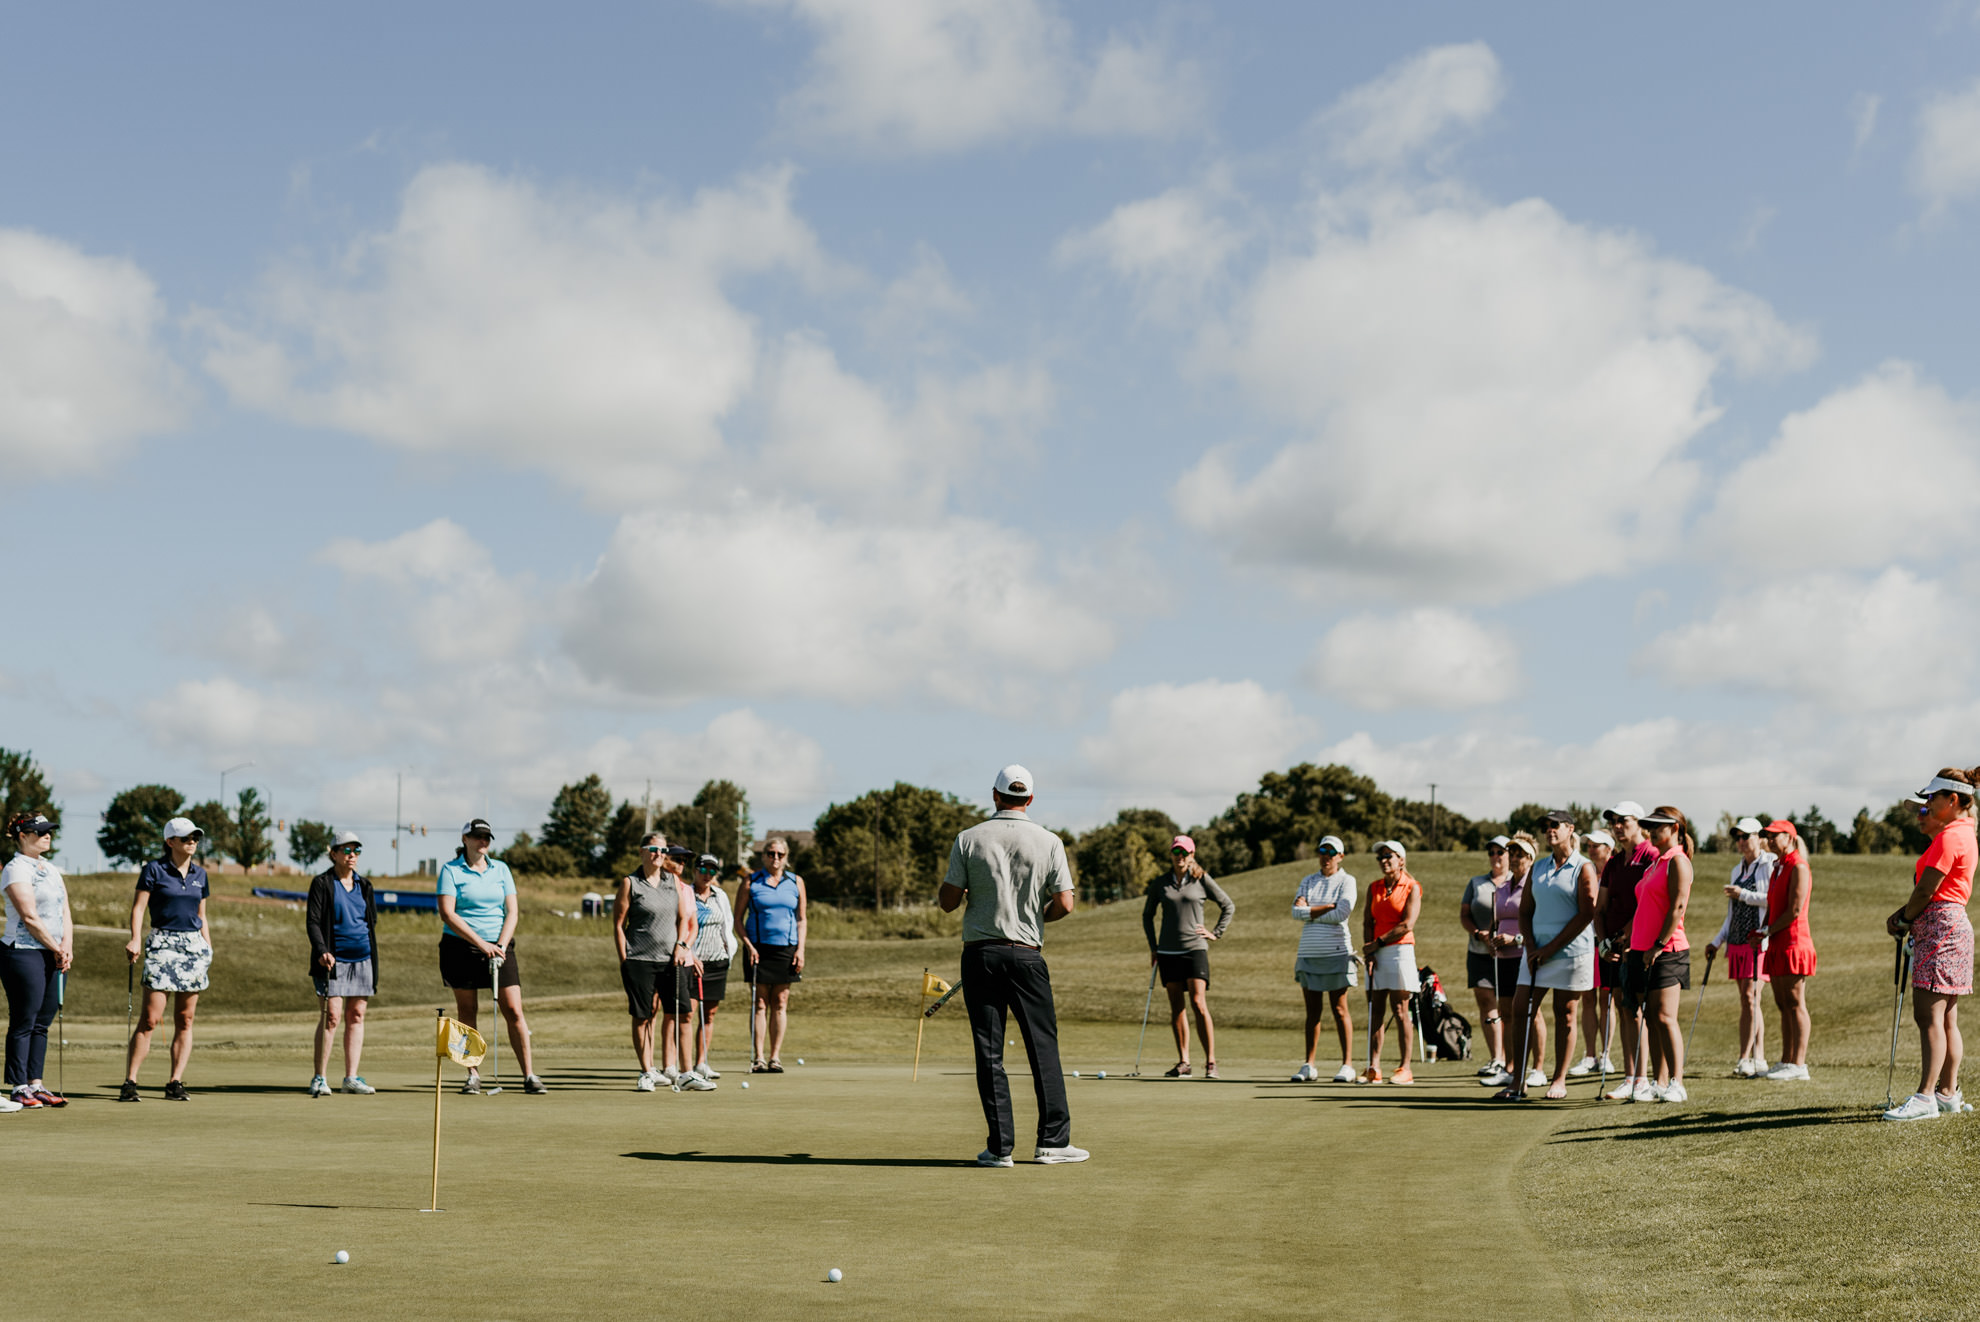 man teaching group of women how to play golf